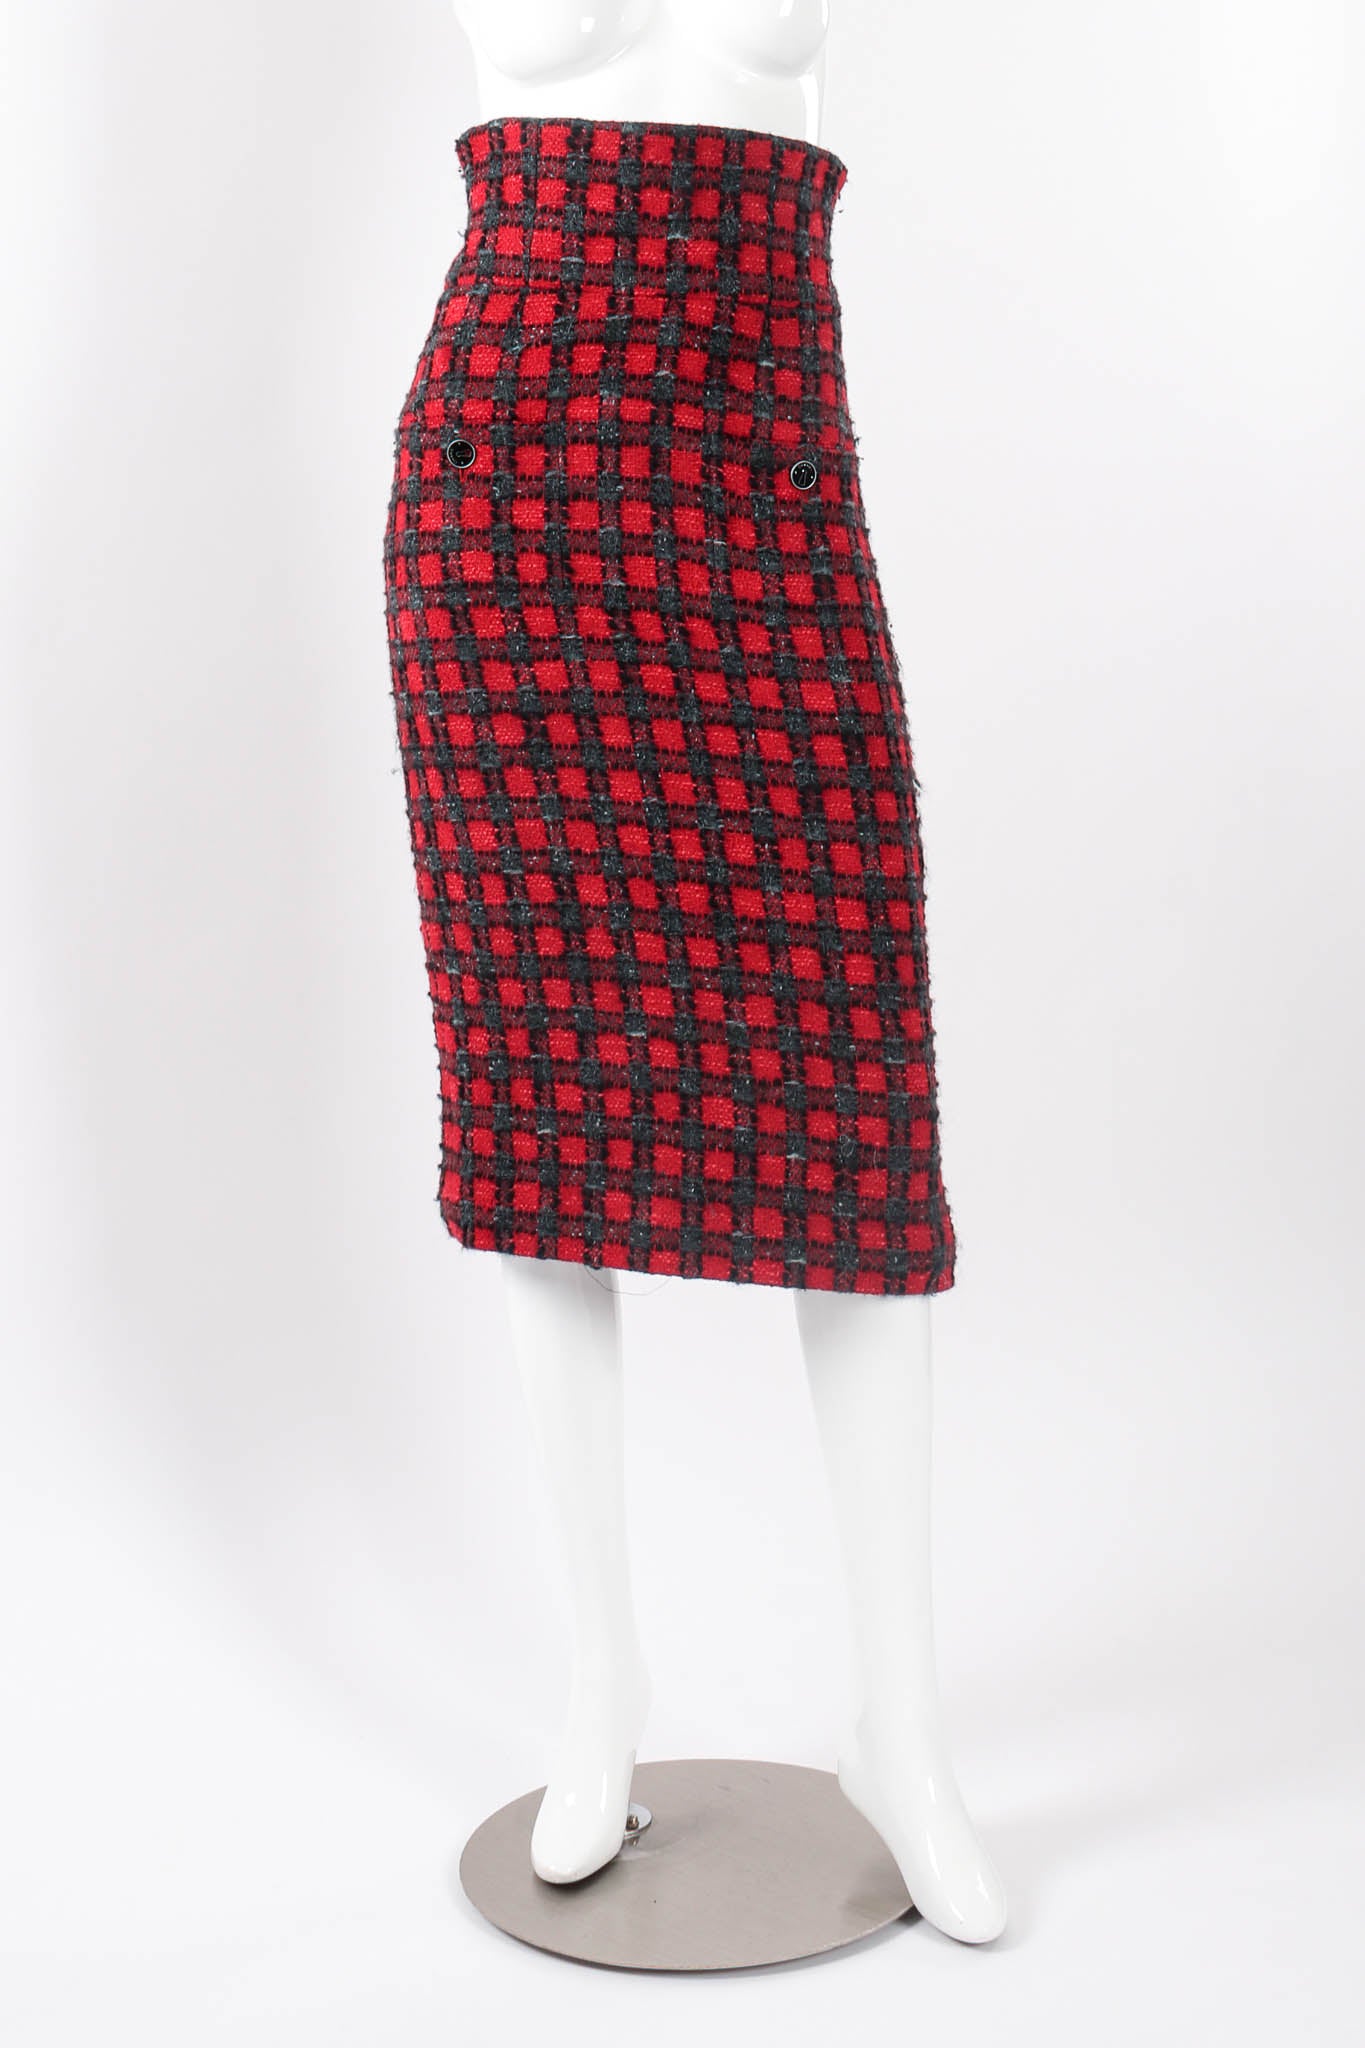 Chanel A/W 2007 High-Waisted Checkered Plaid Skirt on mannequin at Recess LA